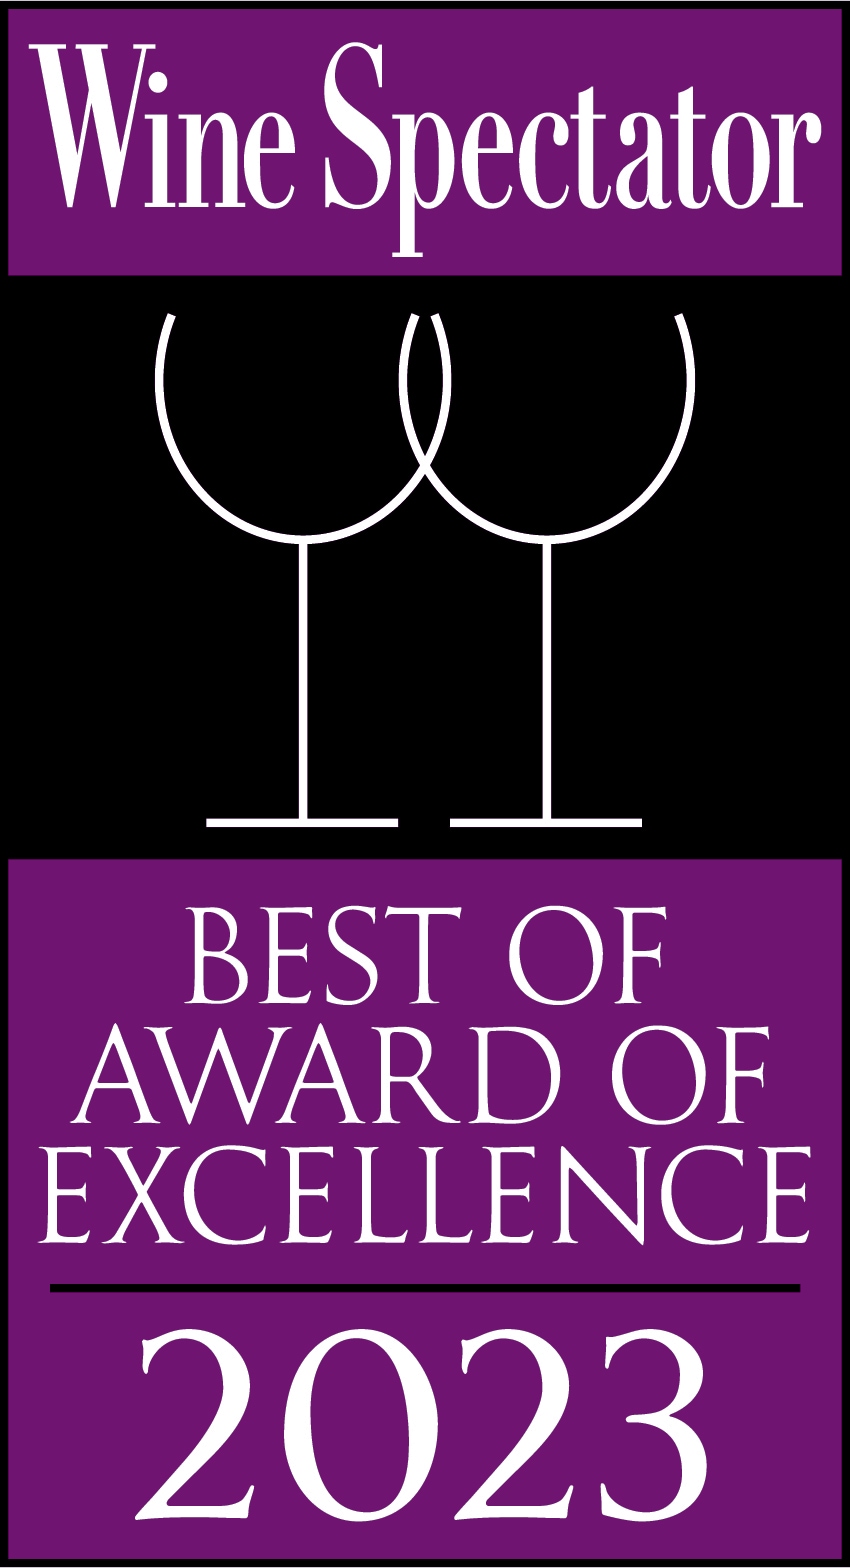 Wine Spectator 2023 - Best of Award of Excellence